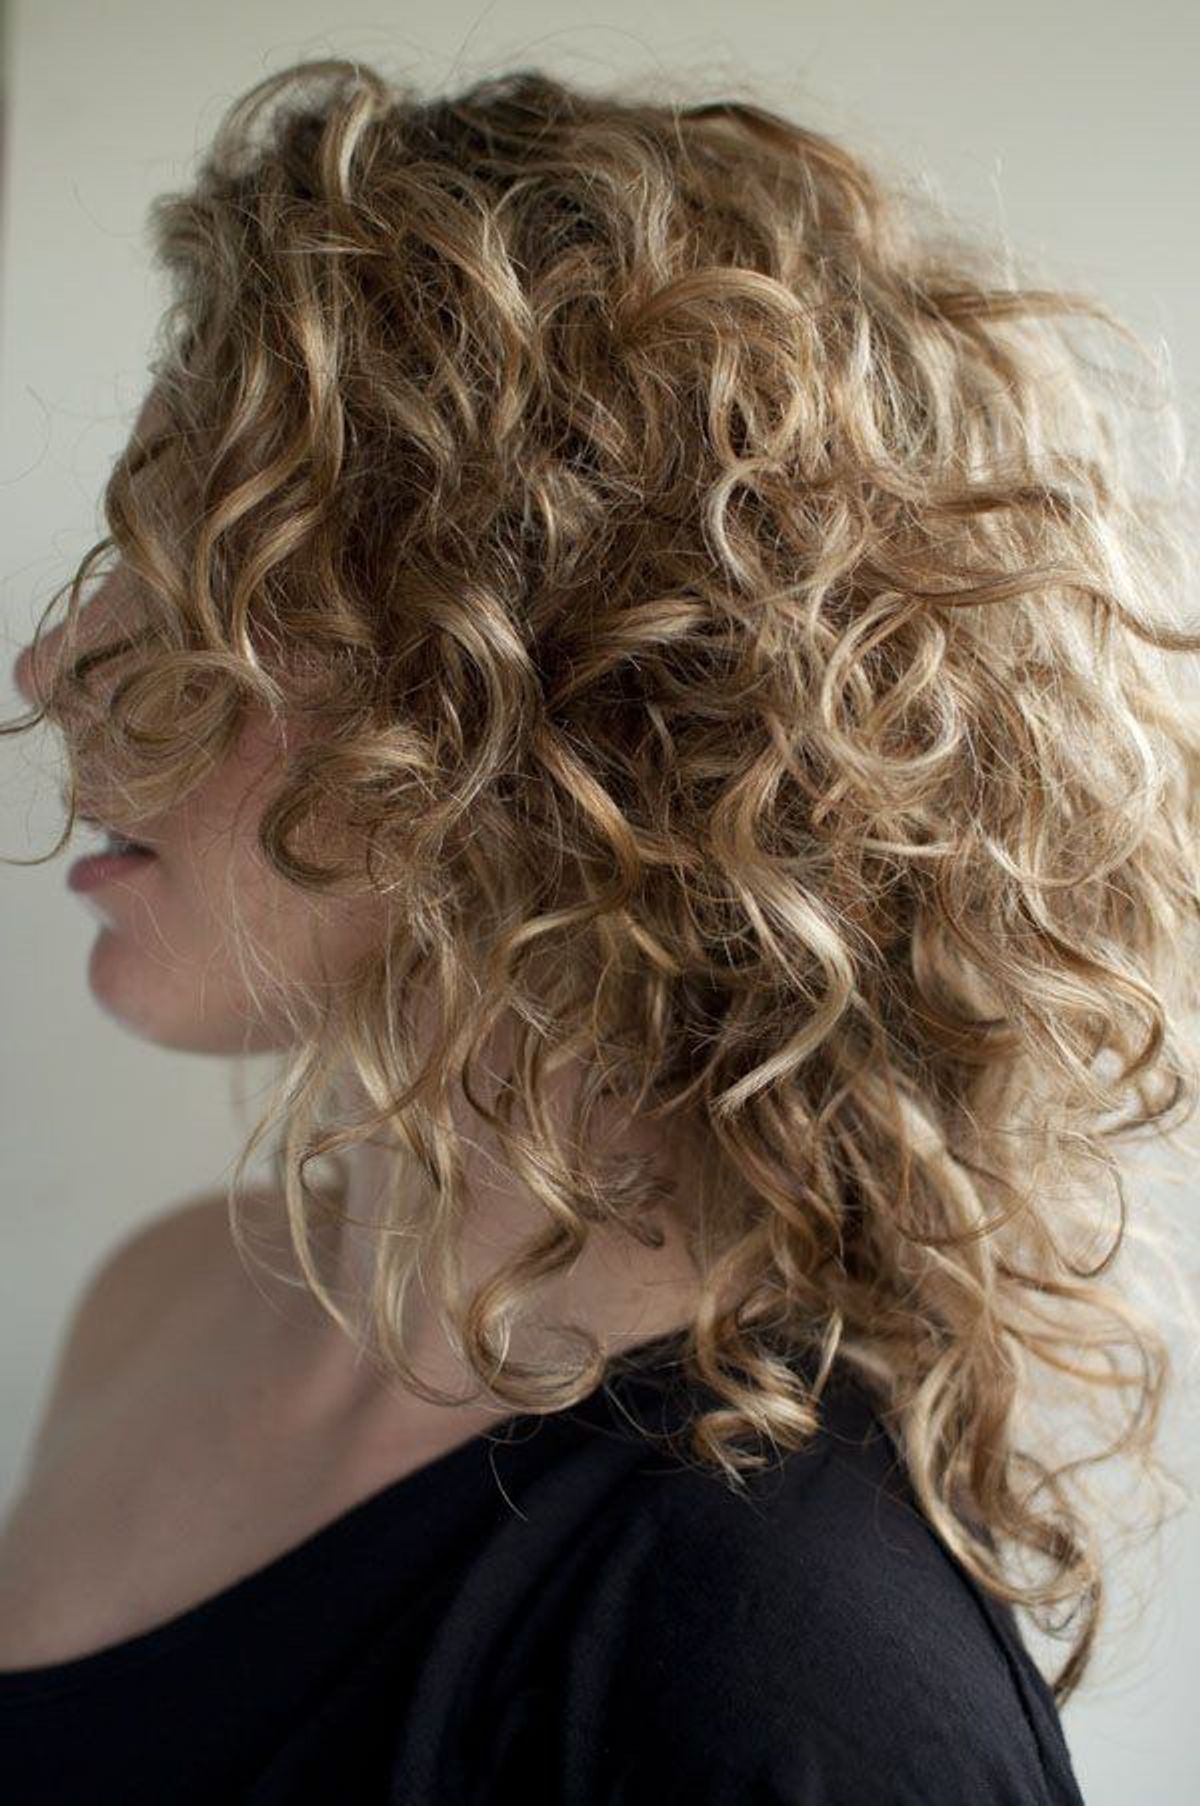 12 Struggles Only People With Curly Hair Will Understand